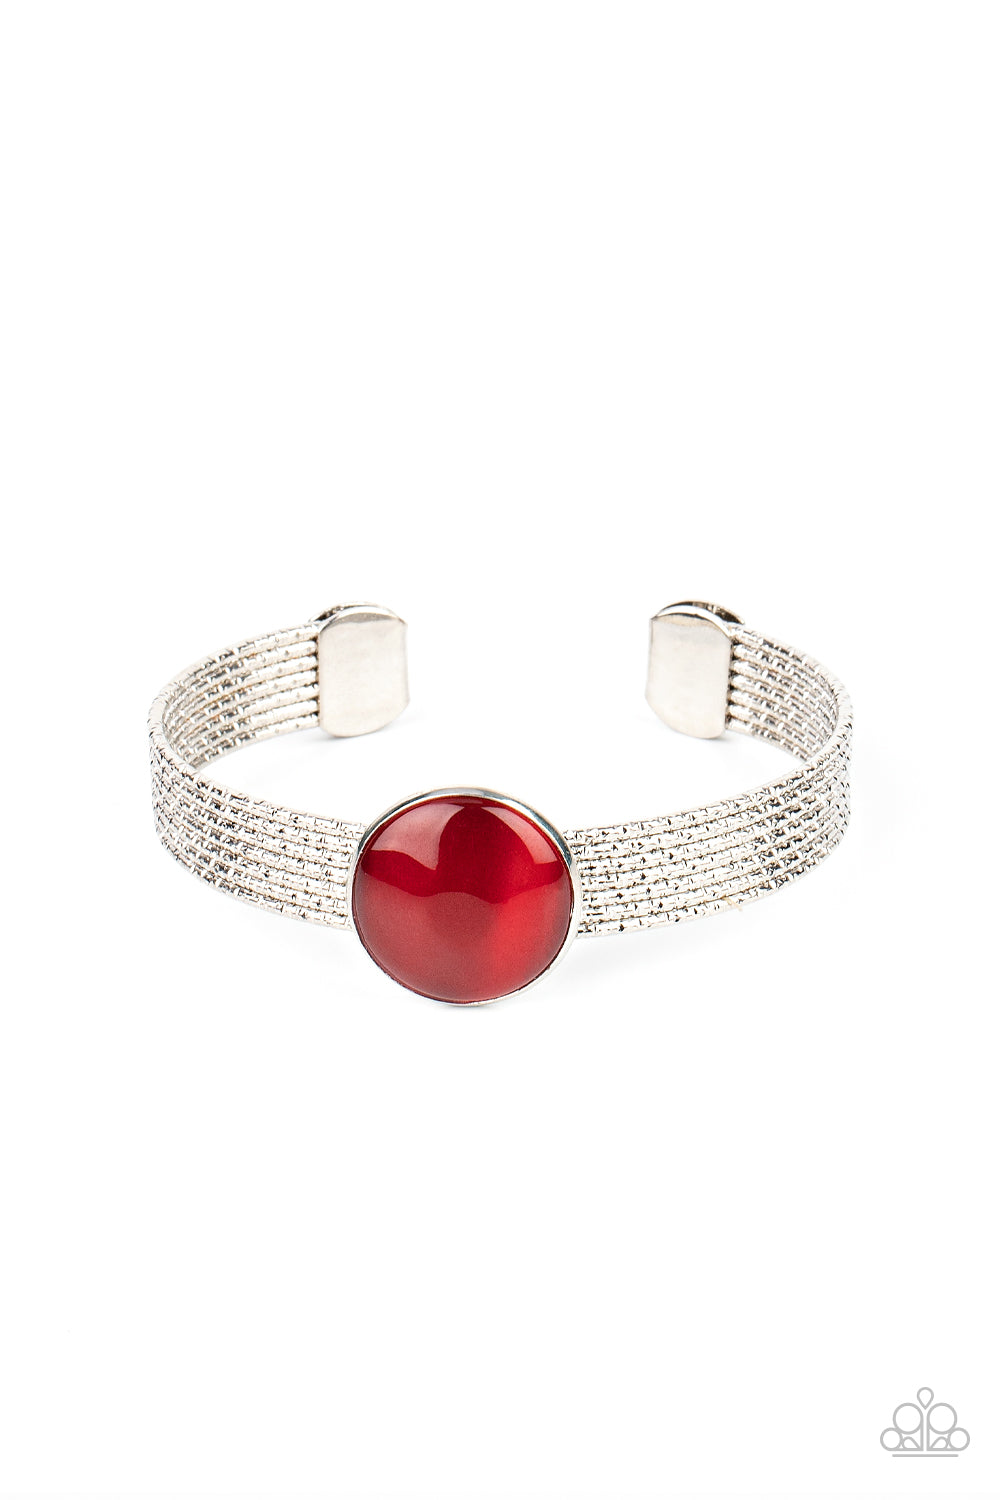 silver, silver jewelry, red, moon stone, red jewelry, affordable jewelry, paparazzi accessories, everyday jewelry, bracelet, cuff, 